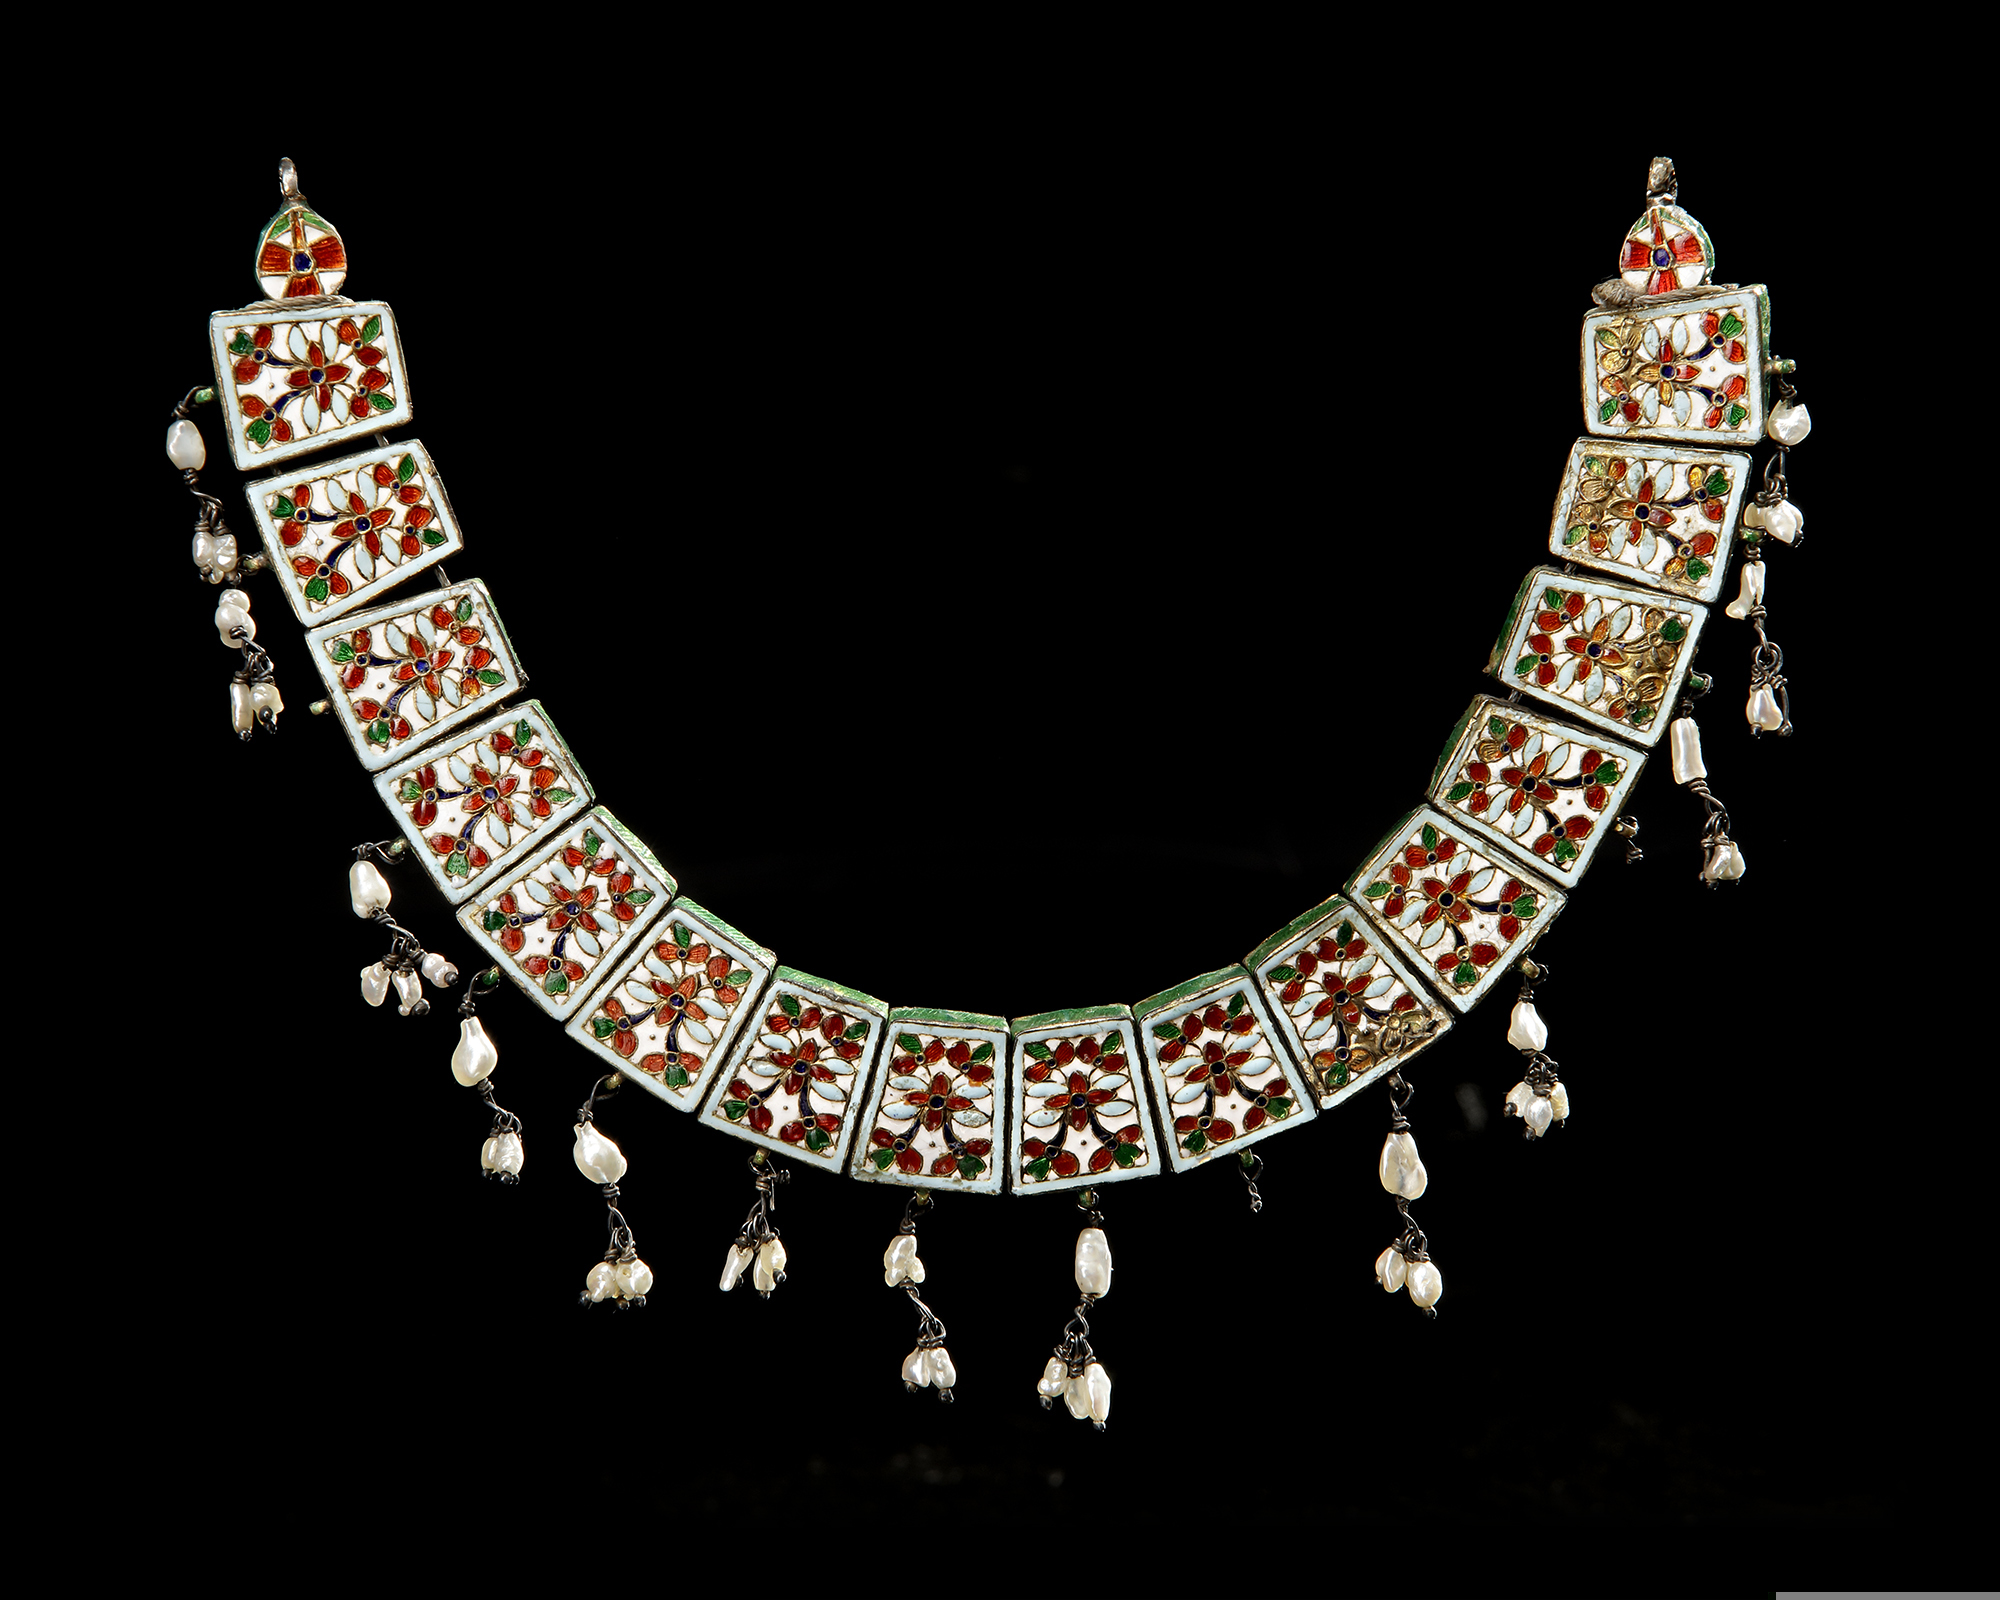 A MUGHAL GEM-SET ENAMELED GOLD NECKLACE, LATE 18TH CENTURY - Image 2 of 3